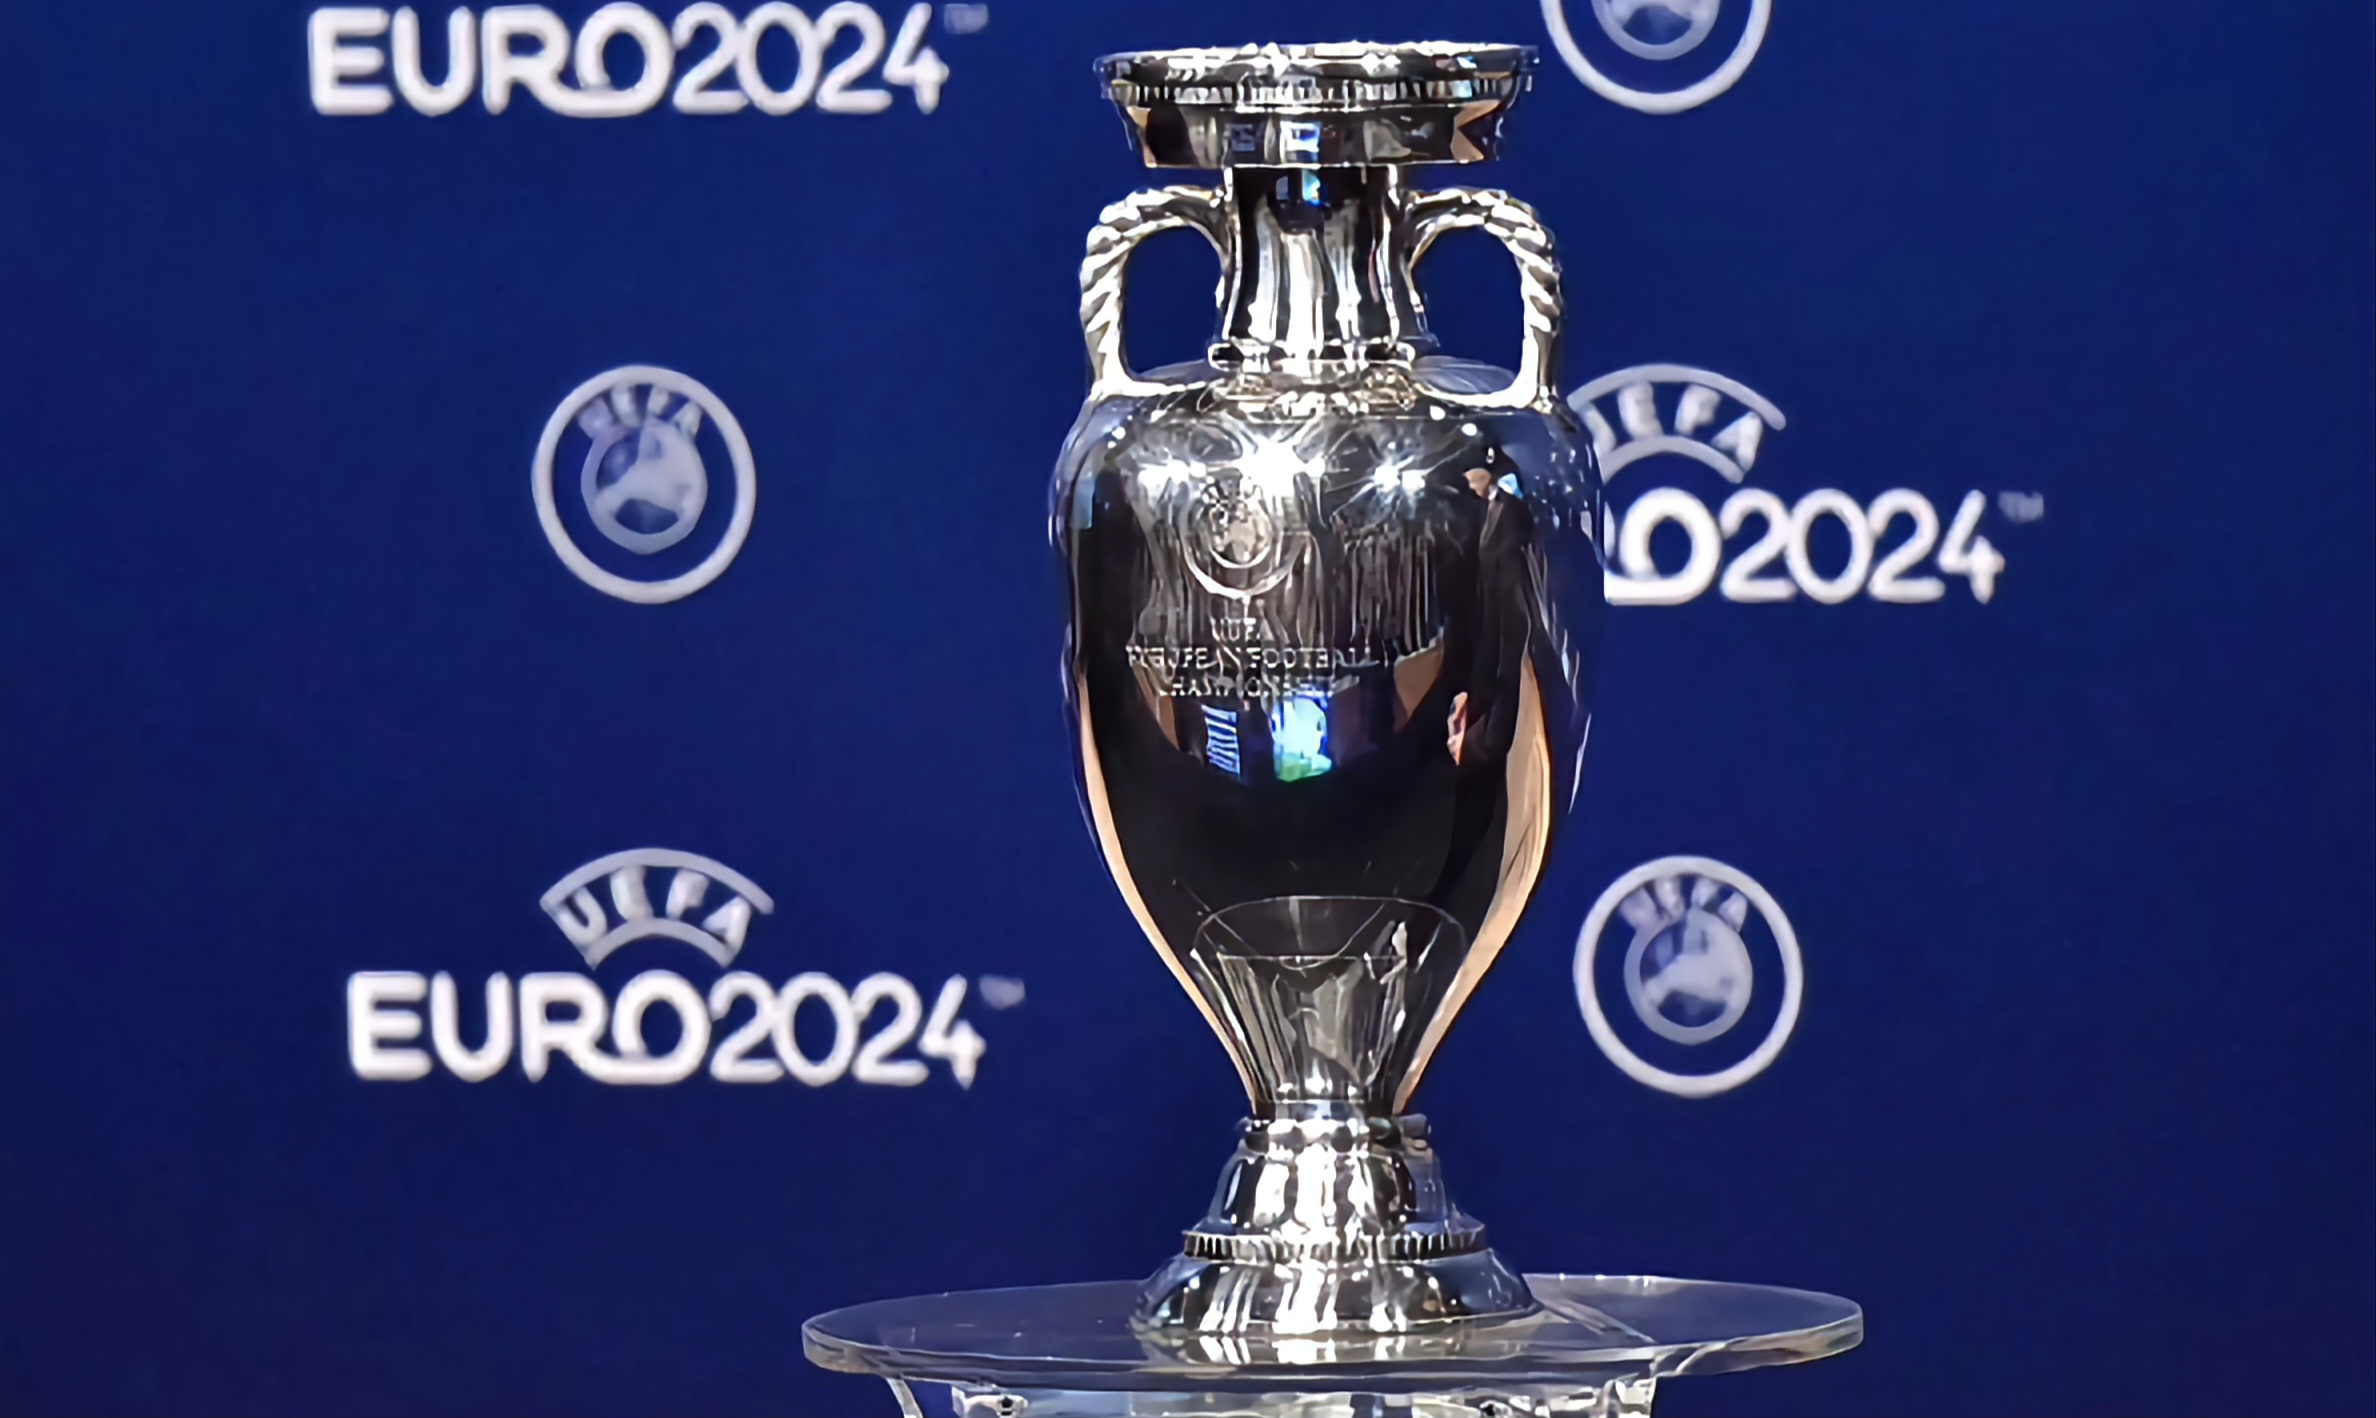 the UEFA Euro trophy on display few moments before the announcement of the elected country which will host the Euro 2024 fooball tournament during a ceremony at the headquarters of the European football's governing body in Nyon.